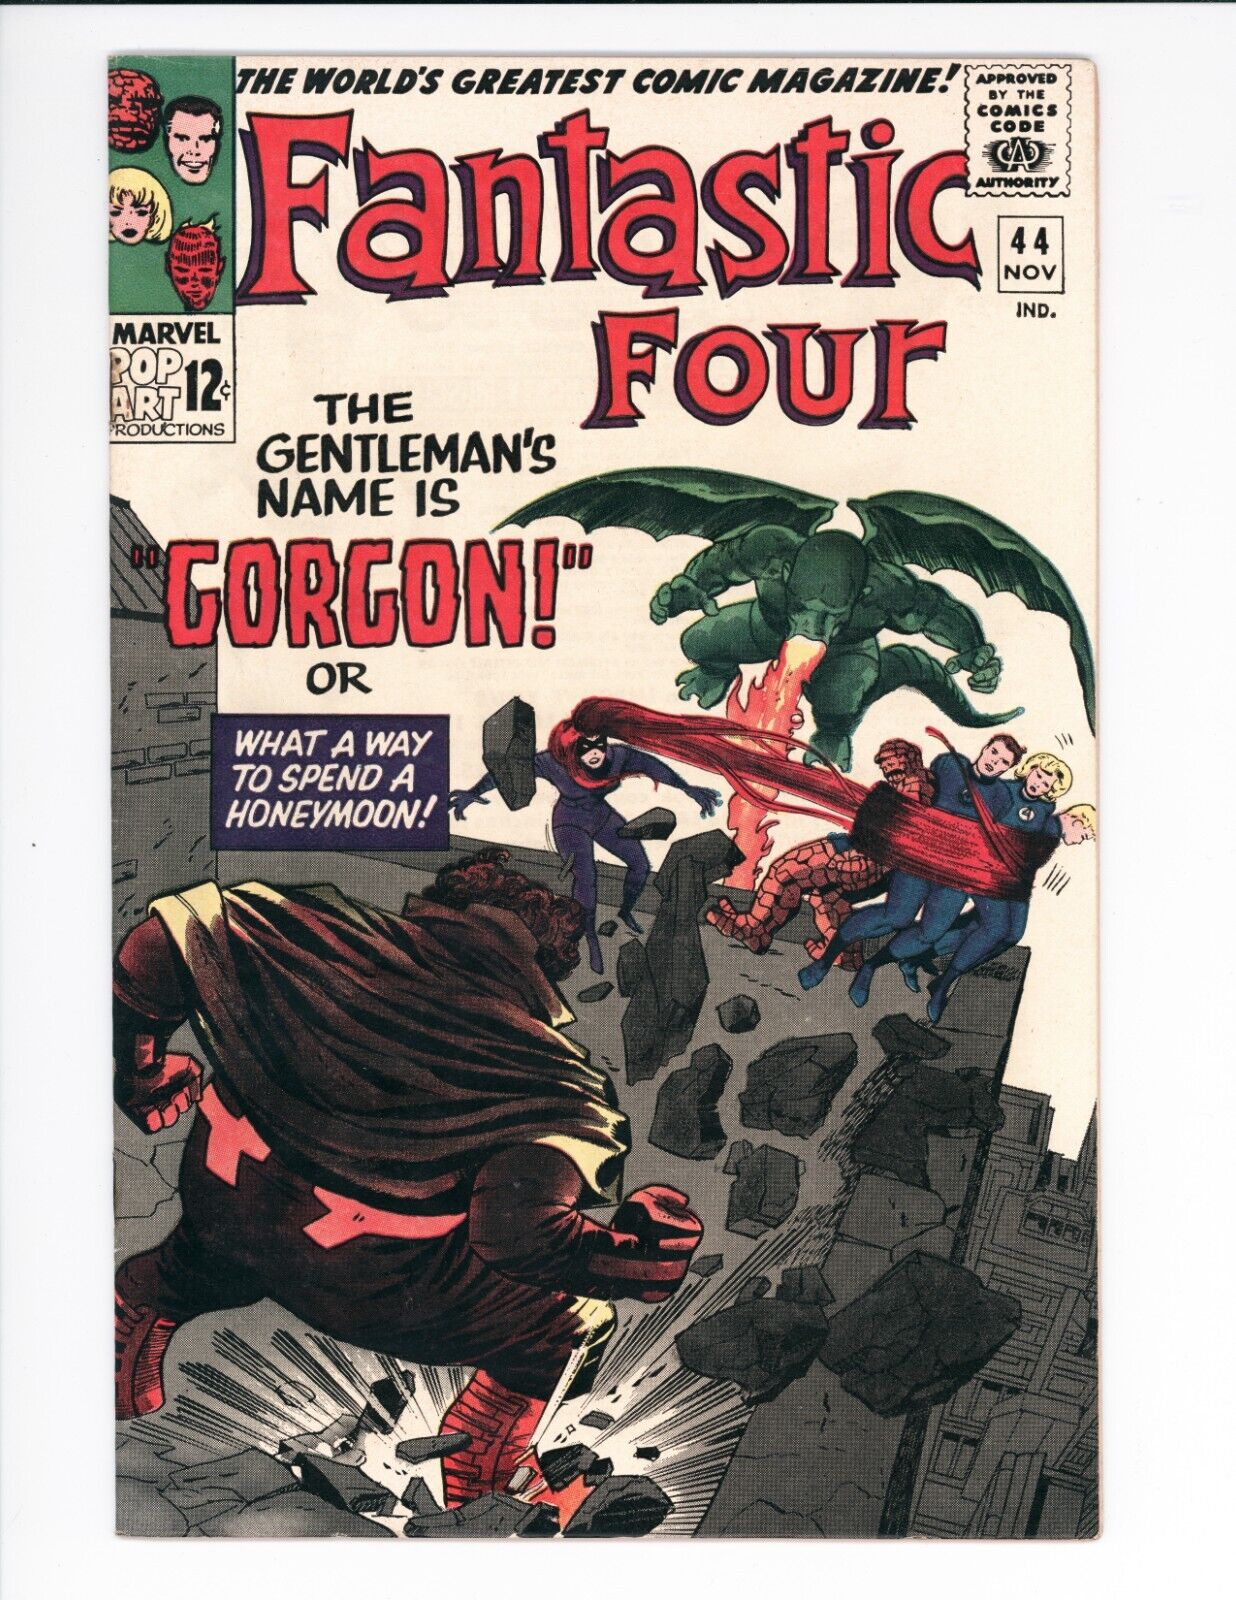 FANTASTIC FOUR #44  * 1st appearance of Gorgon Of The Inhumans *  VF-/VF+   Key